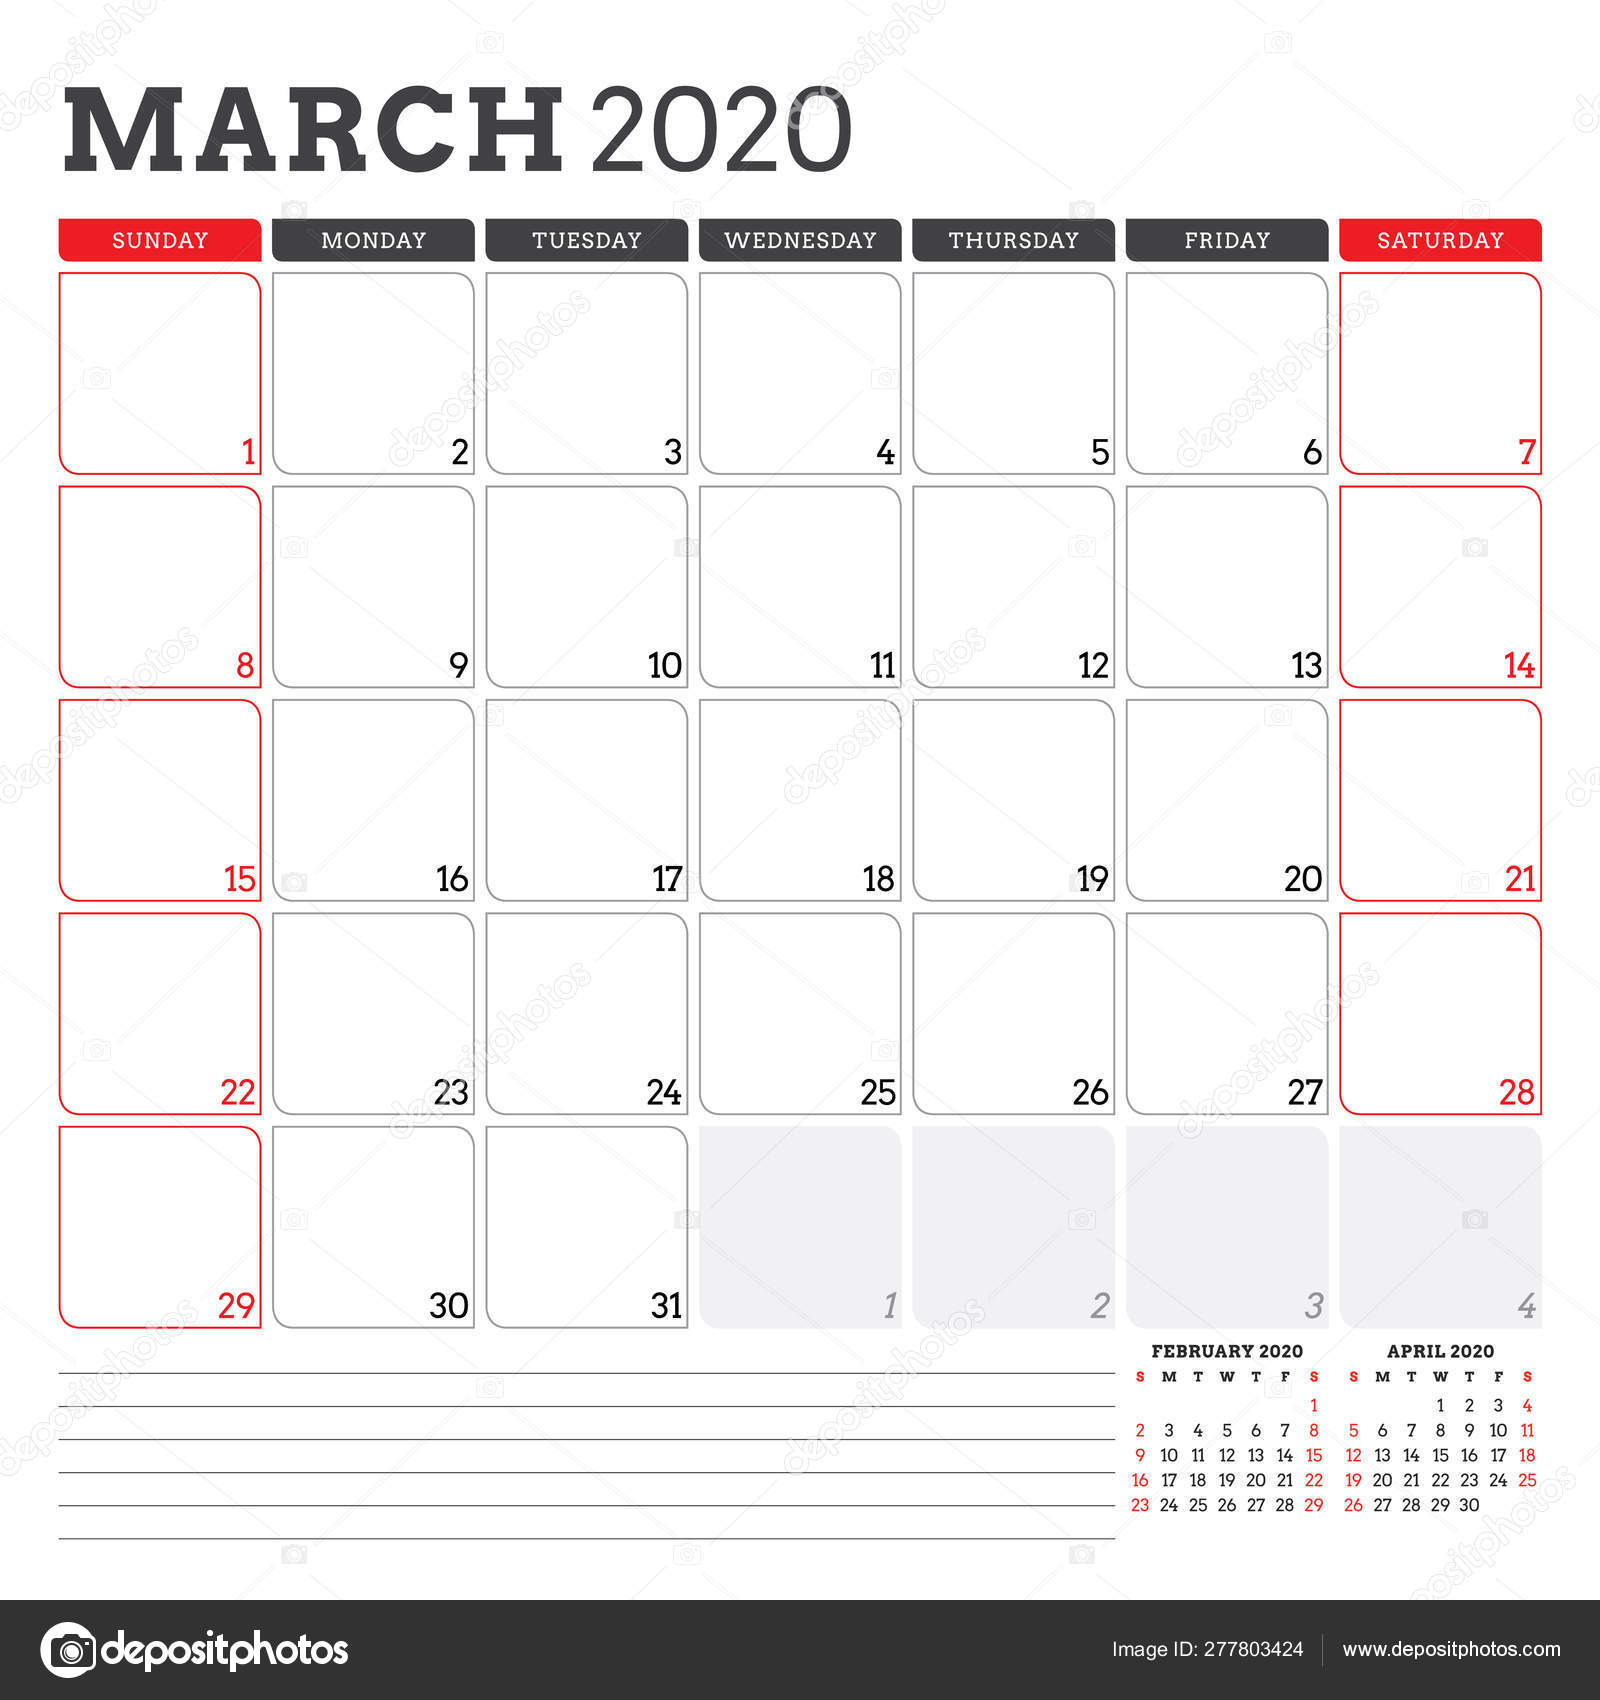 Calendar Planner For March 2020. Week Starts On Sunday